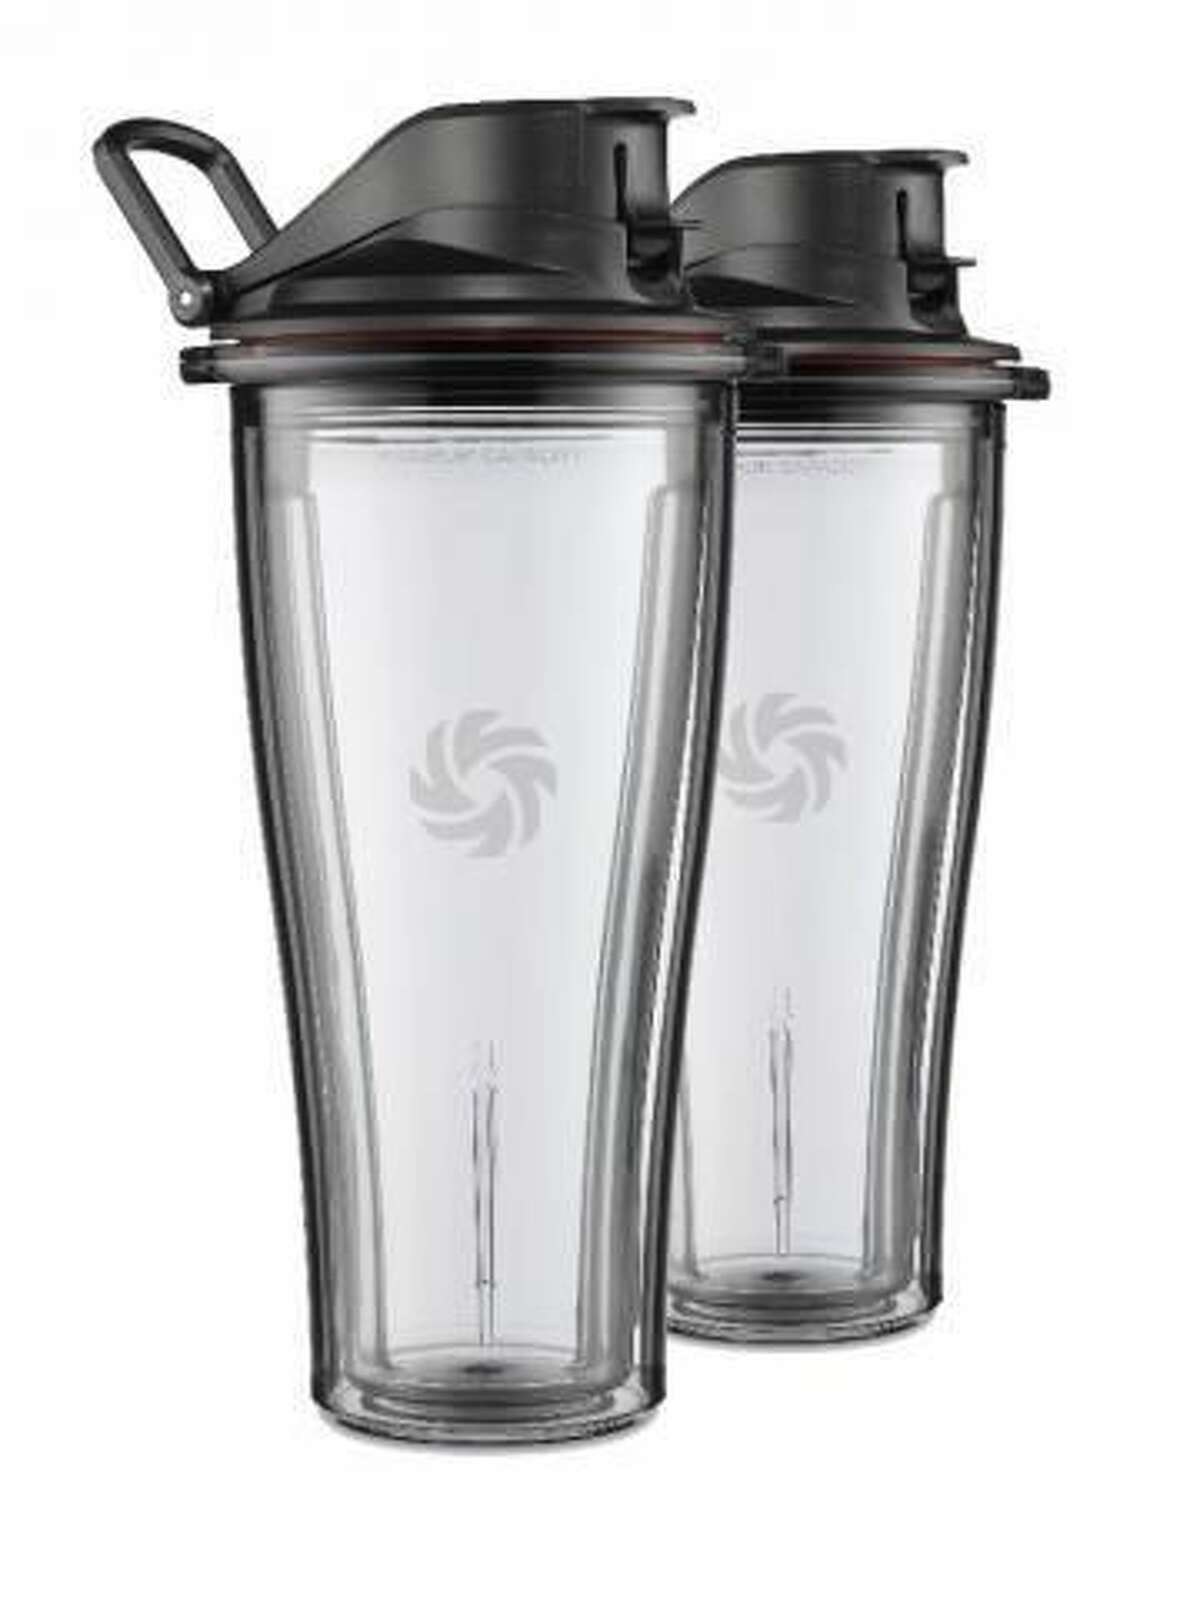 The 20 ounce recalled Vitamix cups.